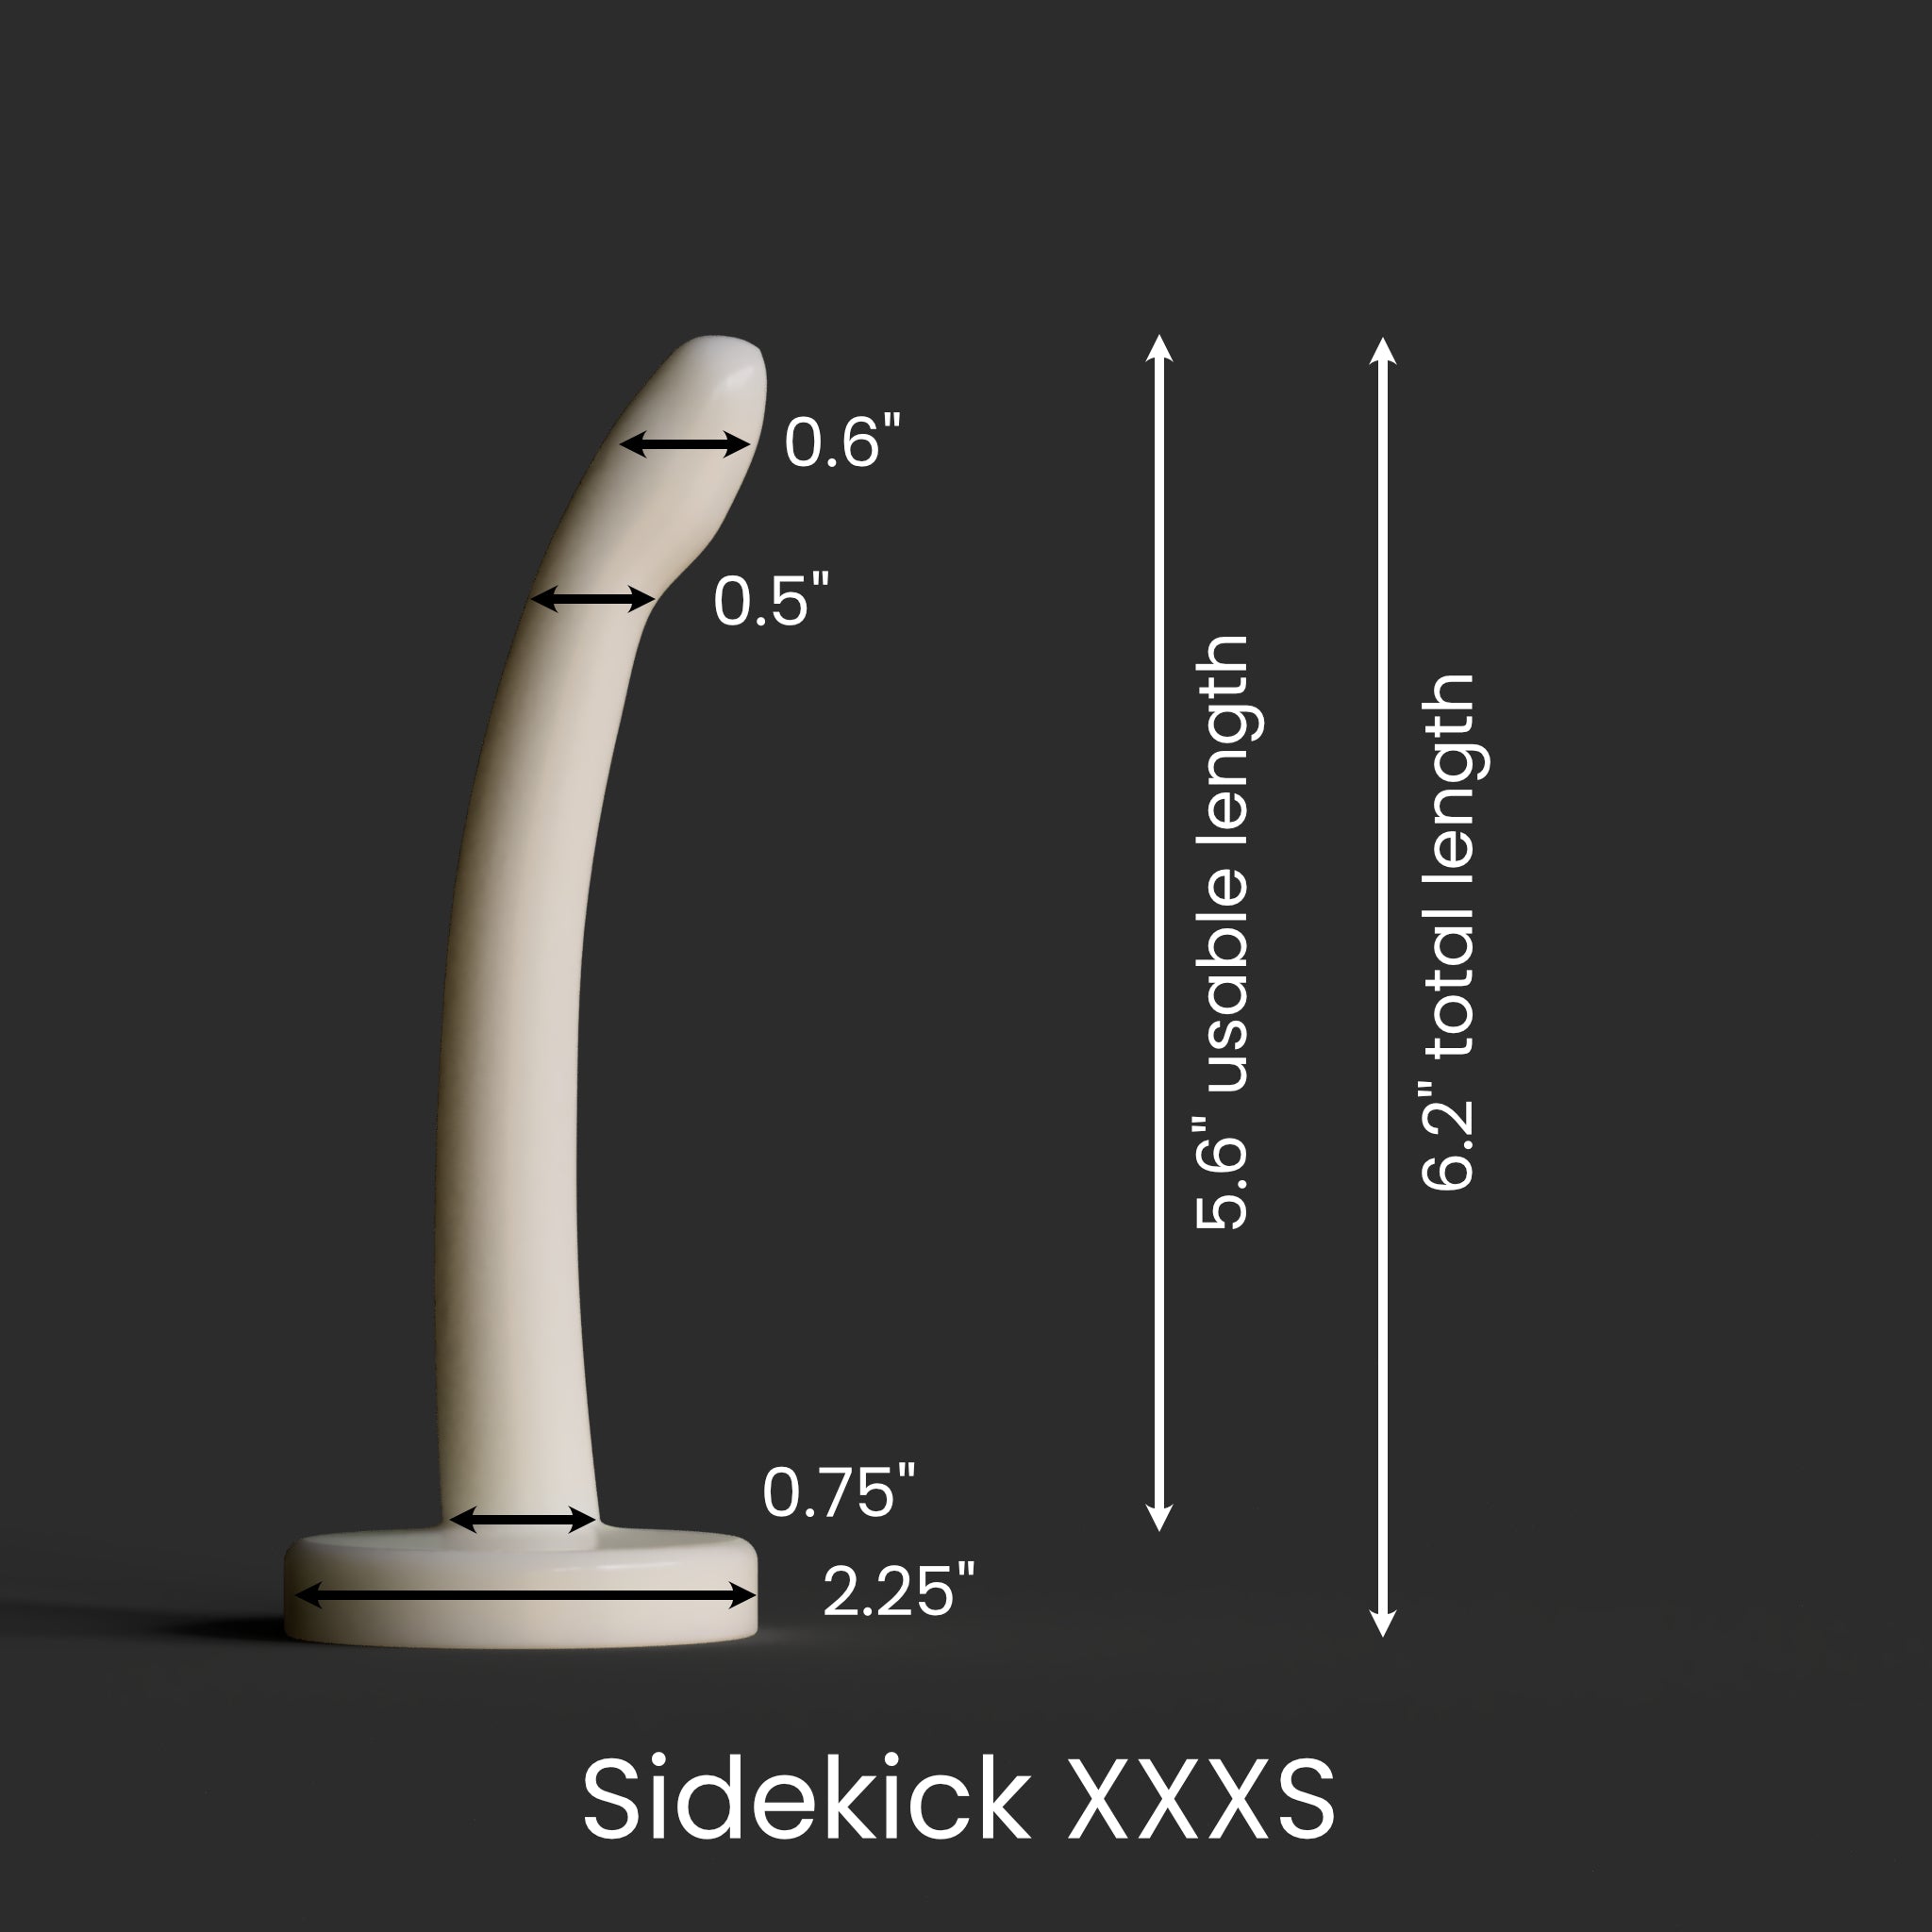 Diagram showing the dimensions of the Sidekick XXXS as described in the product description.